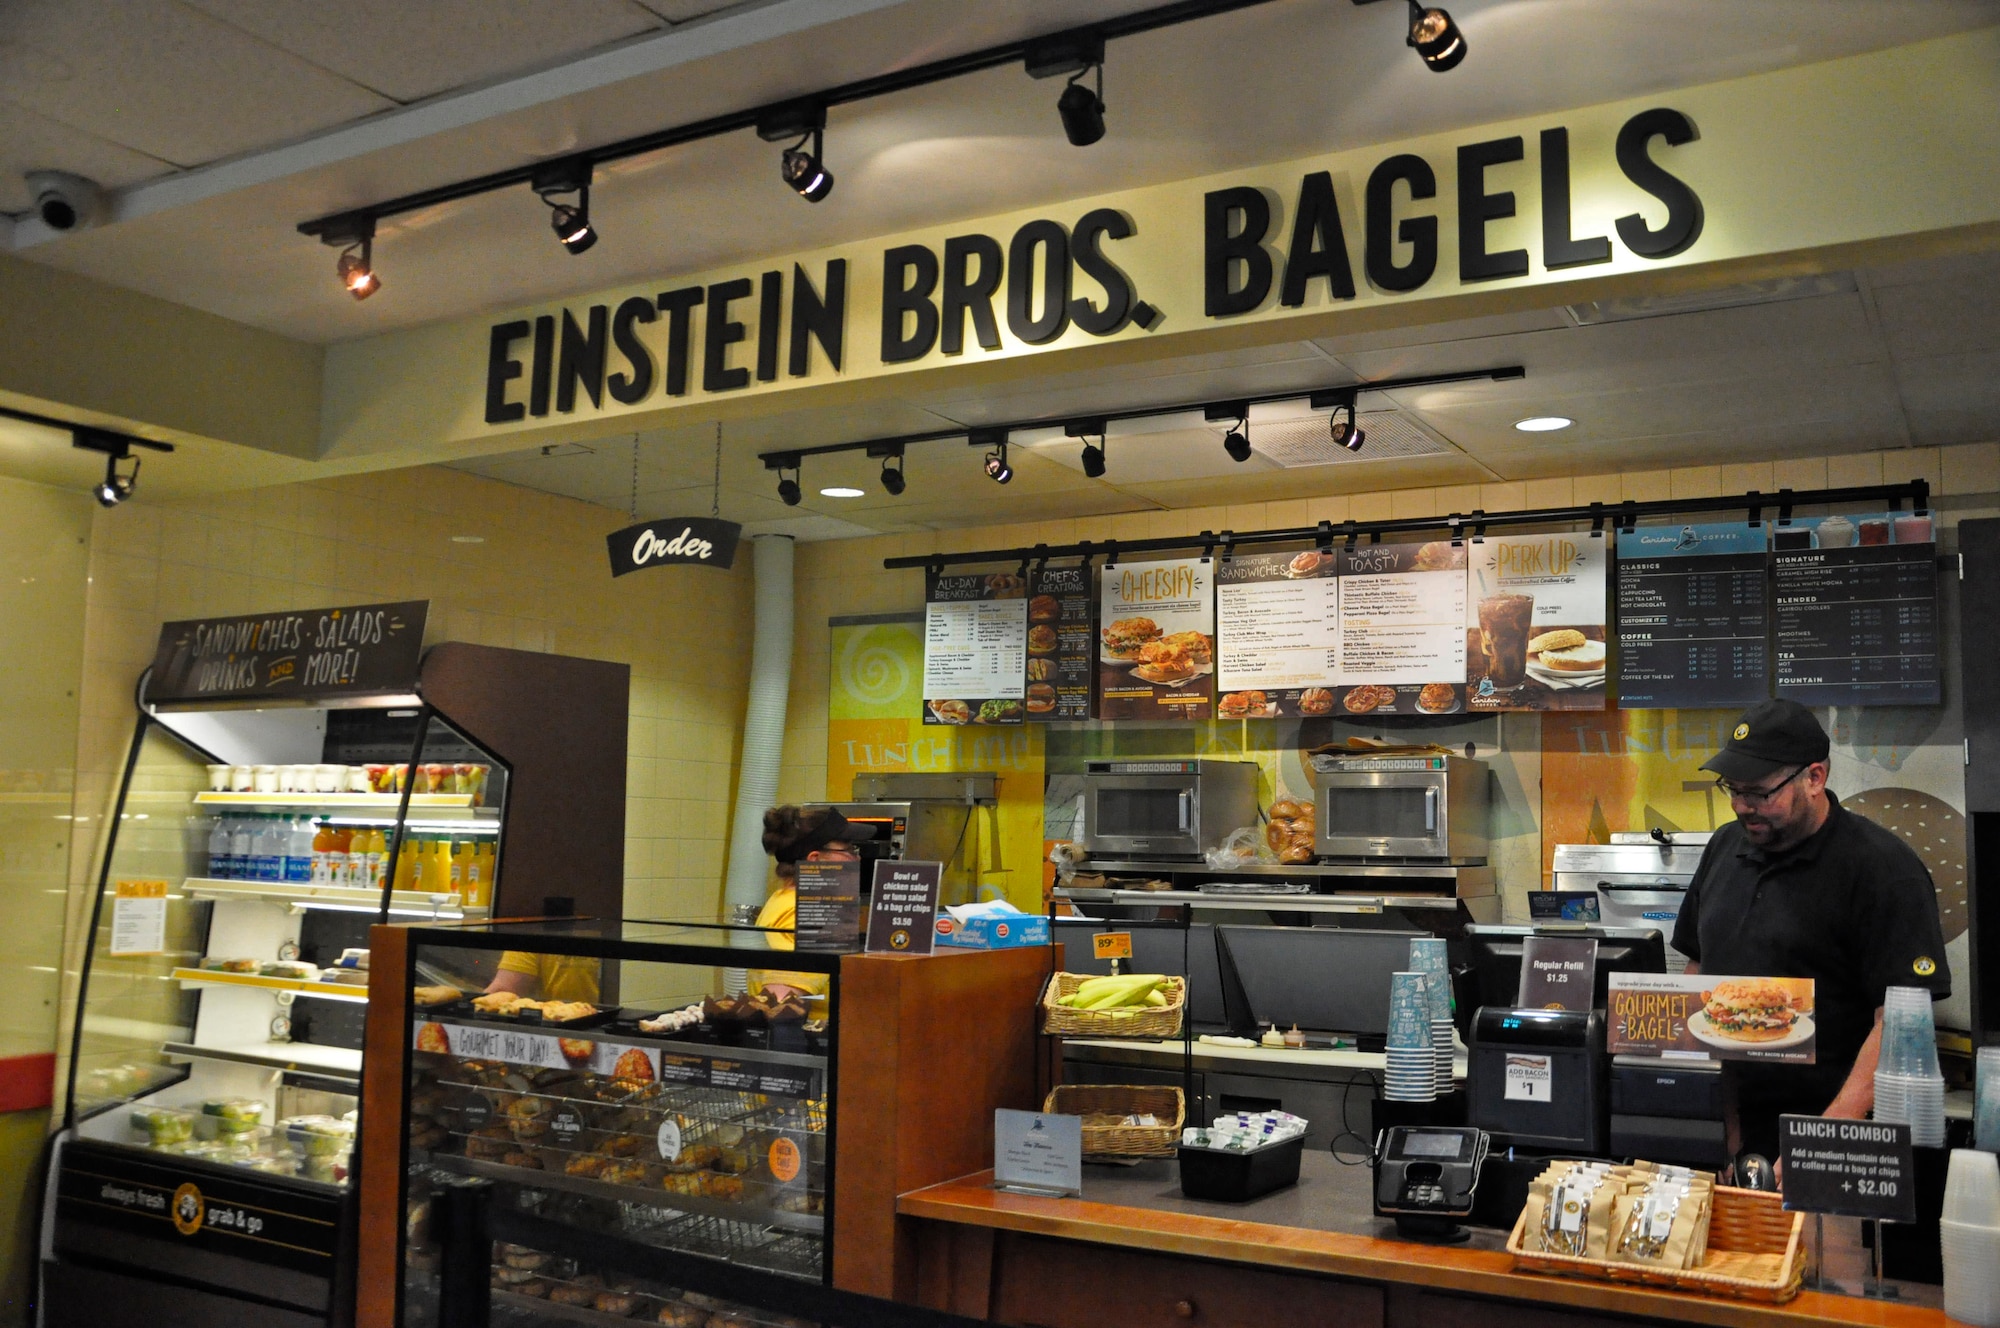 One of the two Einstein Bros. Bagels located on Wright-Patterson Air Force Base is found in the Air Force Institute of Technology, Bldg. 642, on Area B. They are open 7 a.m.-3 p.m., serving a variety of breakfast and lunch items. (U.S. Air Force photo/Karina Brady)